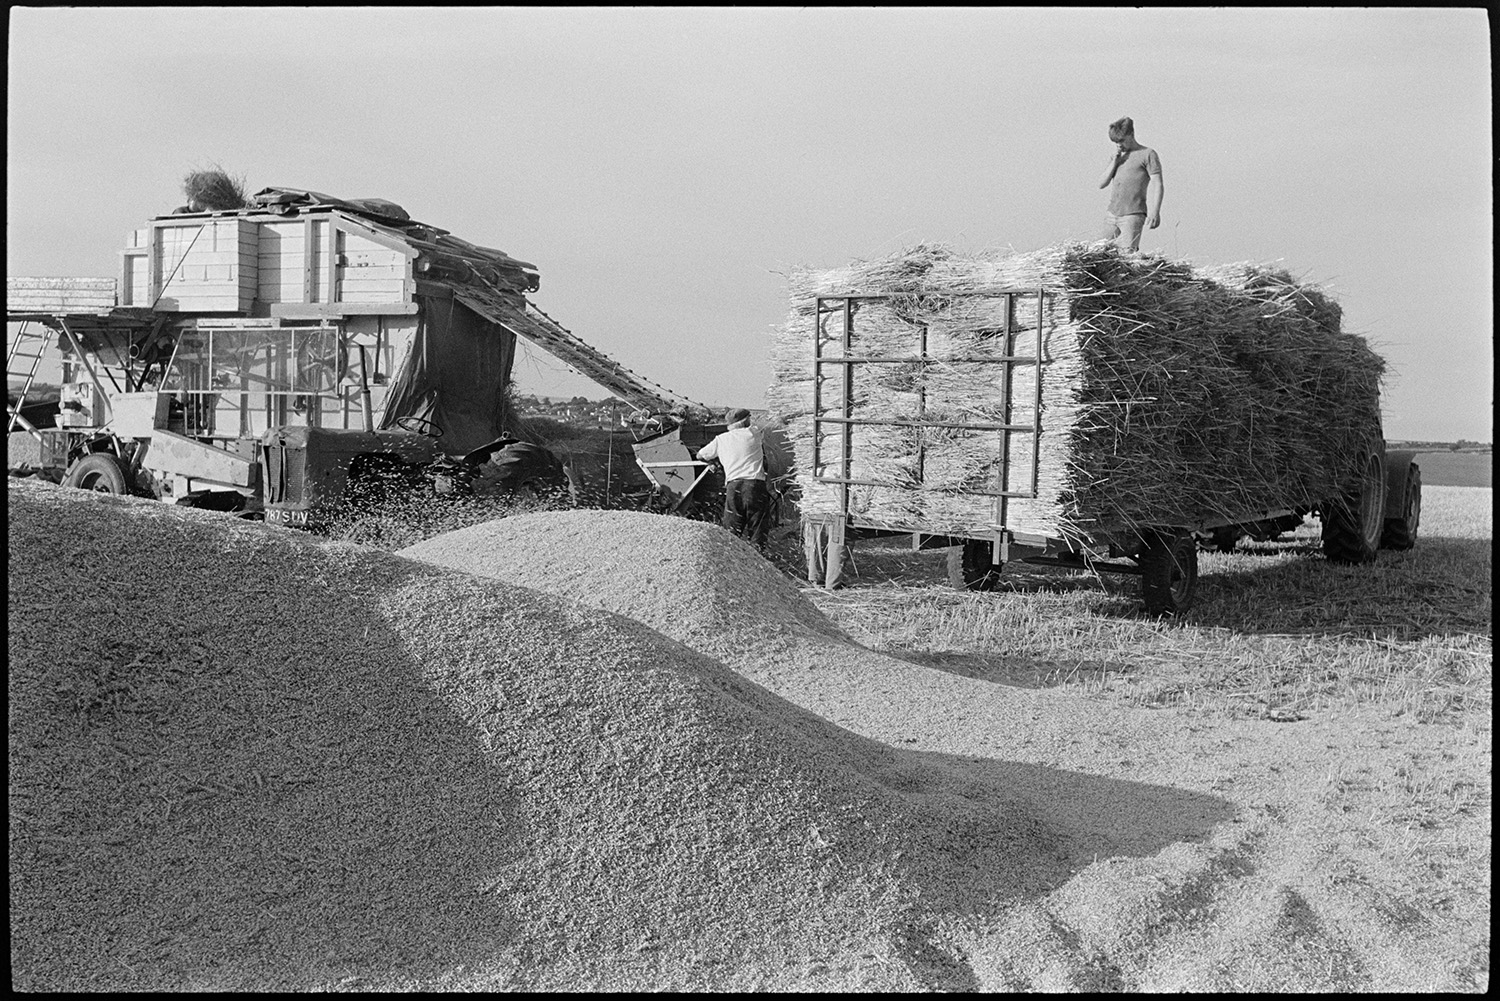 Reedcombers having tea break and working reed comber. 
[Men, including some from the Down family reedcoming in a field at Spittle Farm, Chulmleigh. The reed comber can be seen in the background and in the foreground is a tractor and trailer loaded with bundles of reed and a large pile of grain. A man is stood on top of the trailer.]